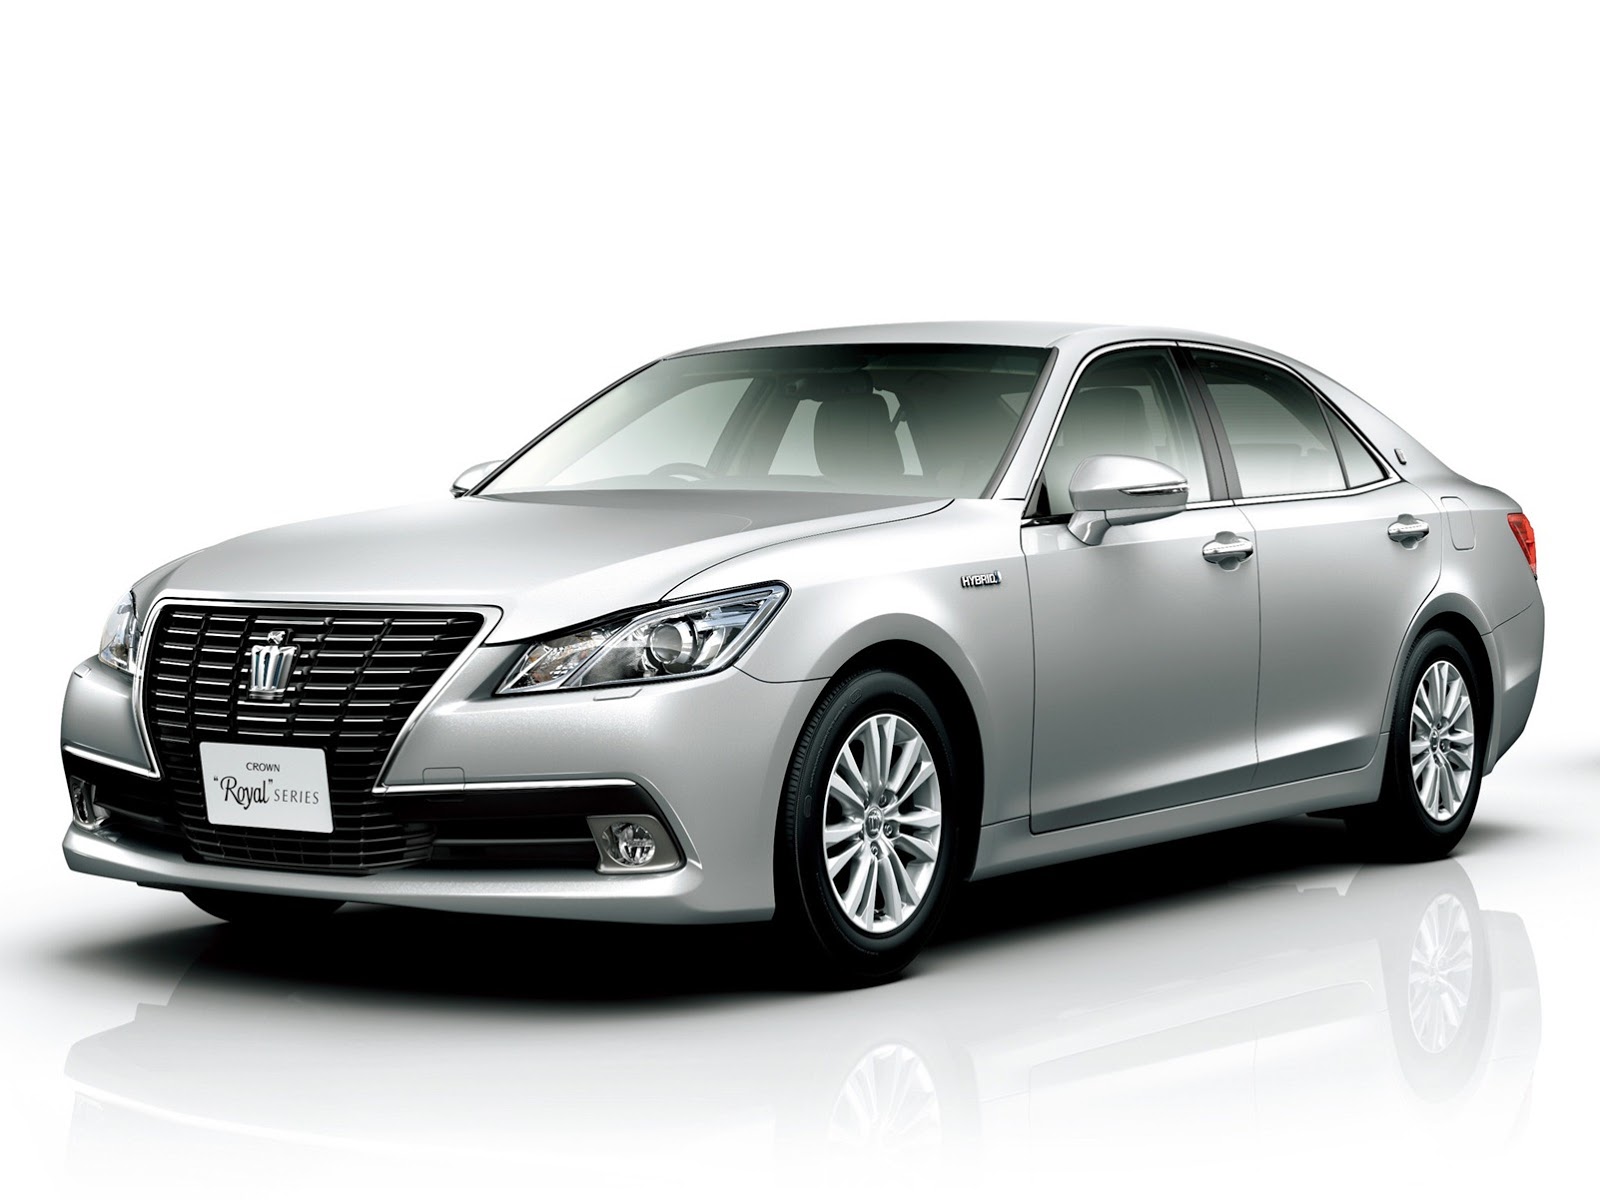 Toyota Crown Price in Pakistan, Pictures & Reviews PakWheels